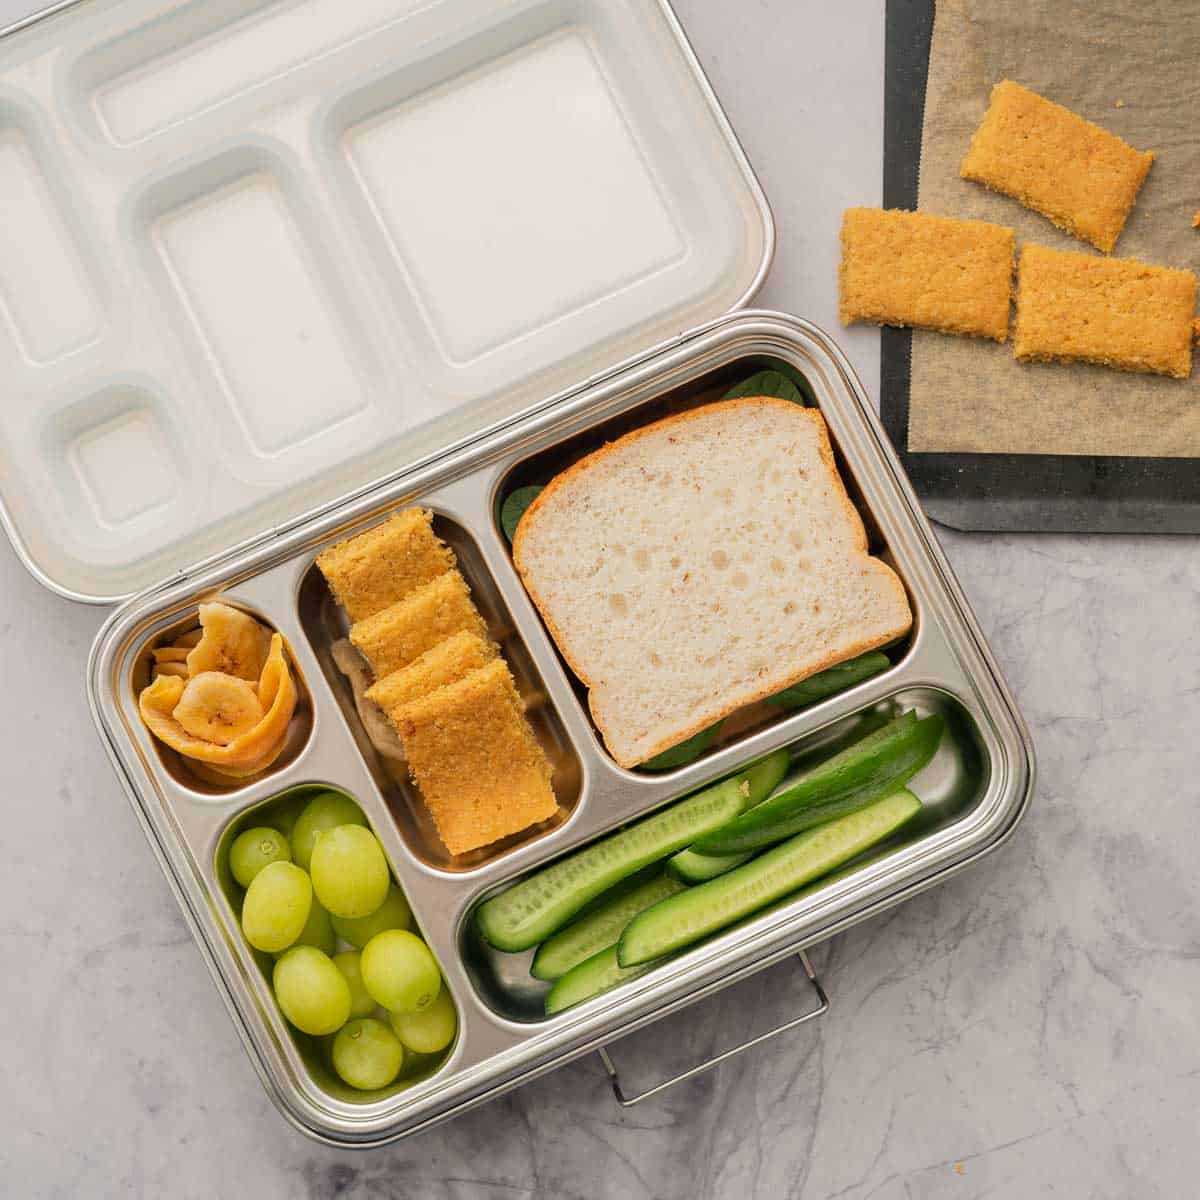 A stainless steel bento box packed with a sandwich, crackers, fruit and vegetables.